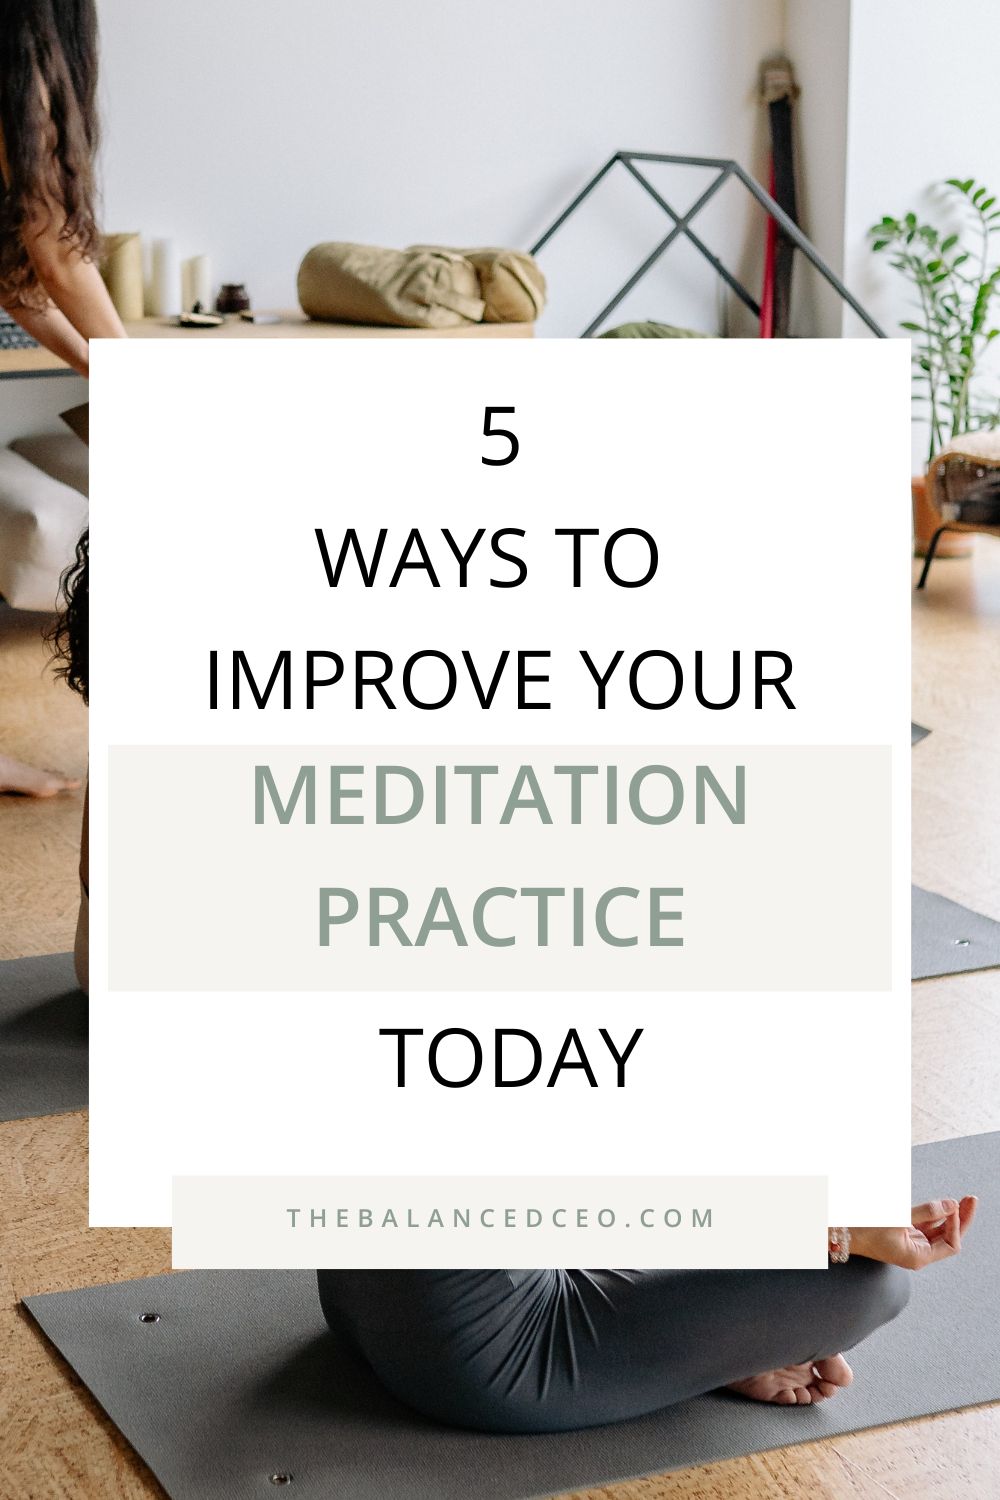 Here Are 5 Ways to Improve Your Meditation Practice Today